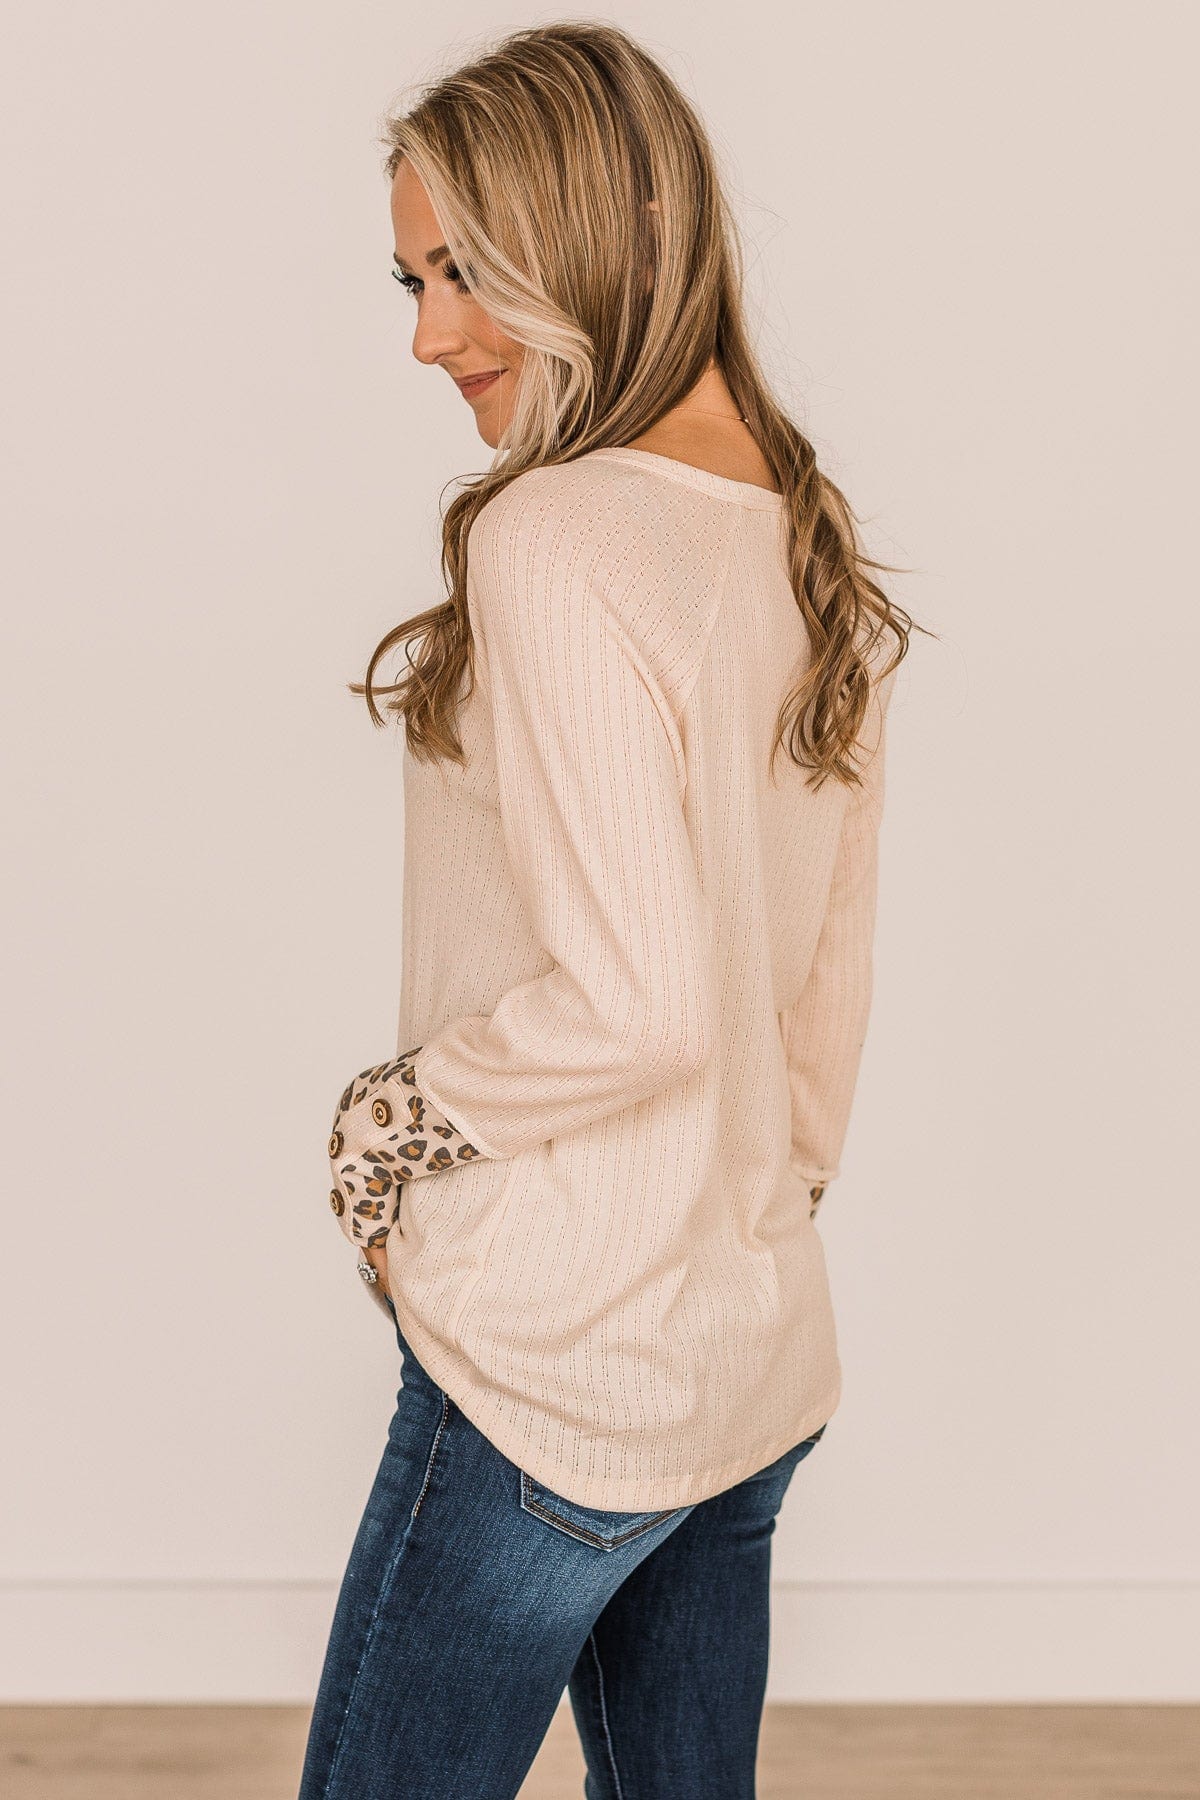 At My Happiest Button Knit Top- Cream